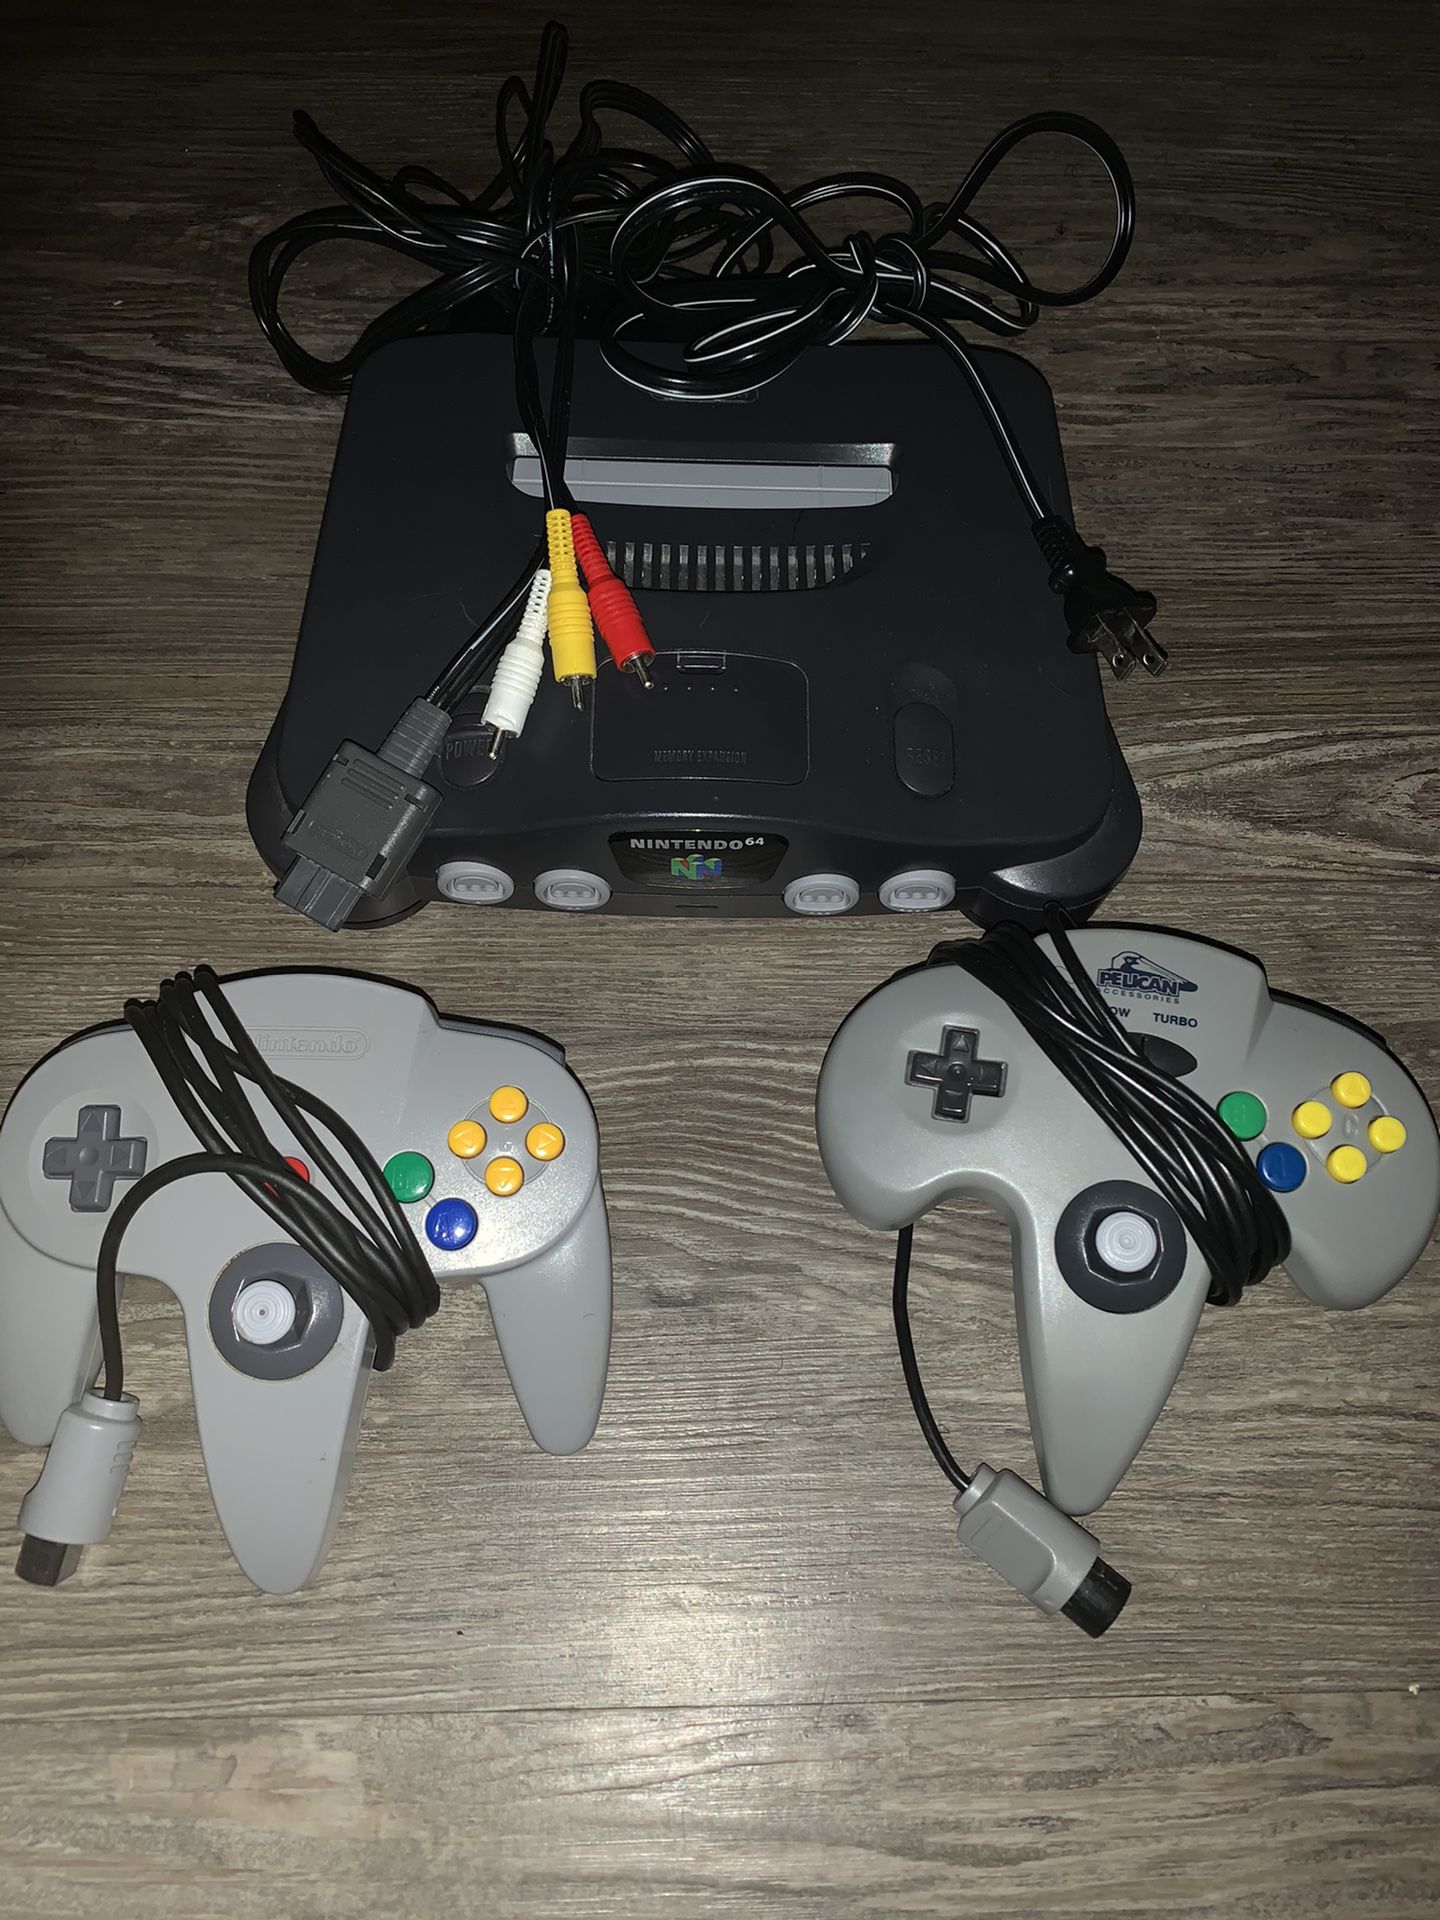 Nintendo 64 !! Comes with everything! DONT BE AFRAID TO OFFER WHAT YOU CAN !!